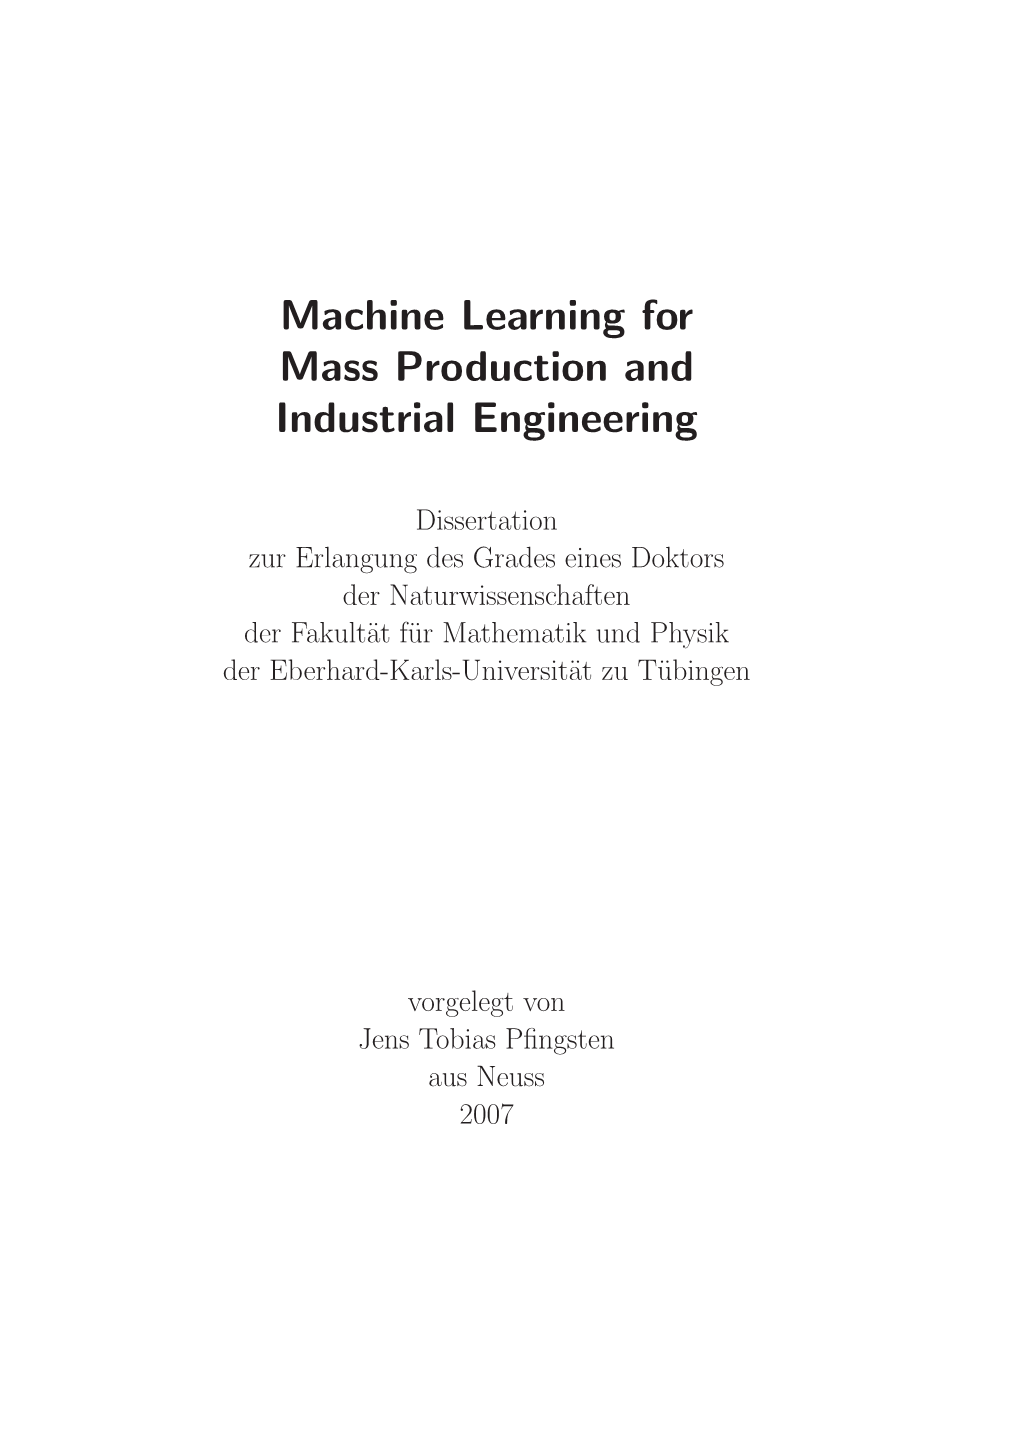 Machine Learning for Mass Production and Industrial Engineering